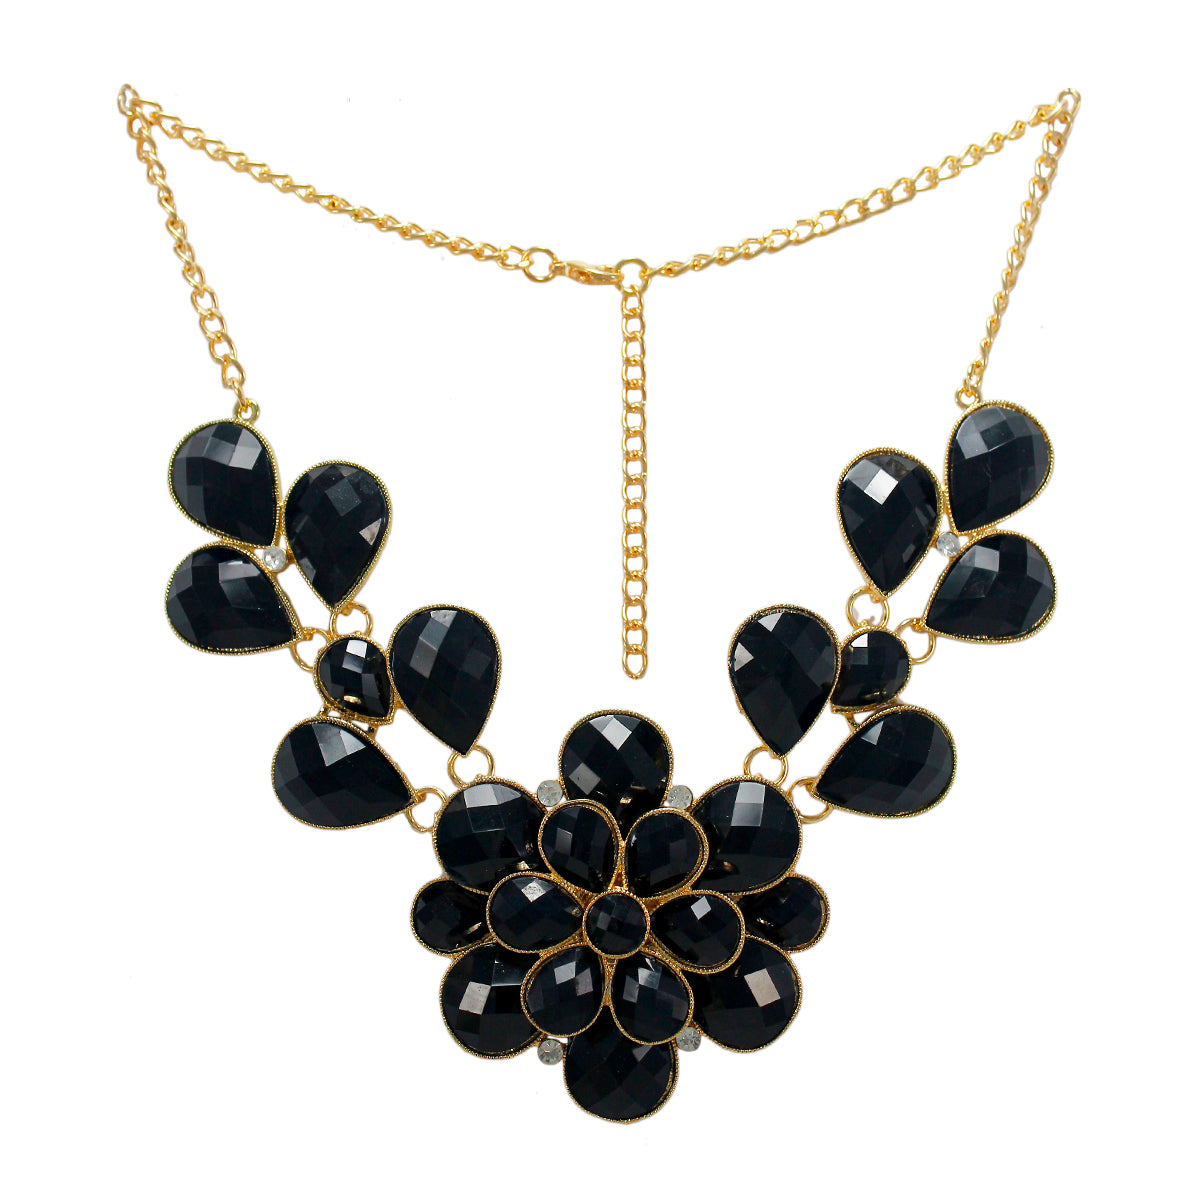 Abhinn Beautiful Designer Golden Floral Necklace With Black crystal Stones For Women